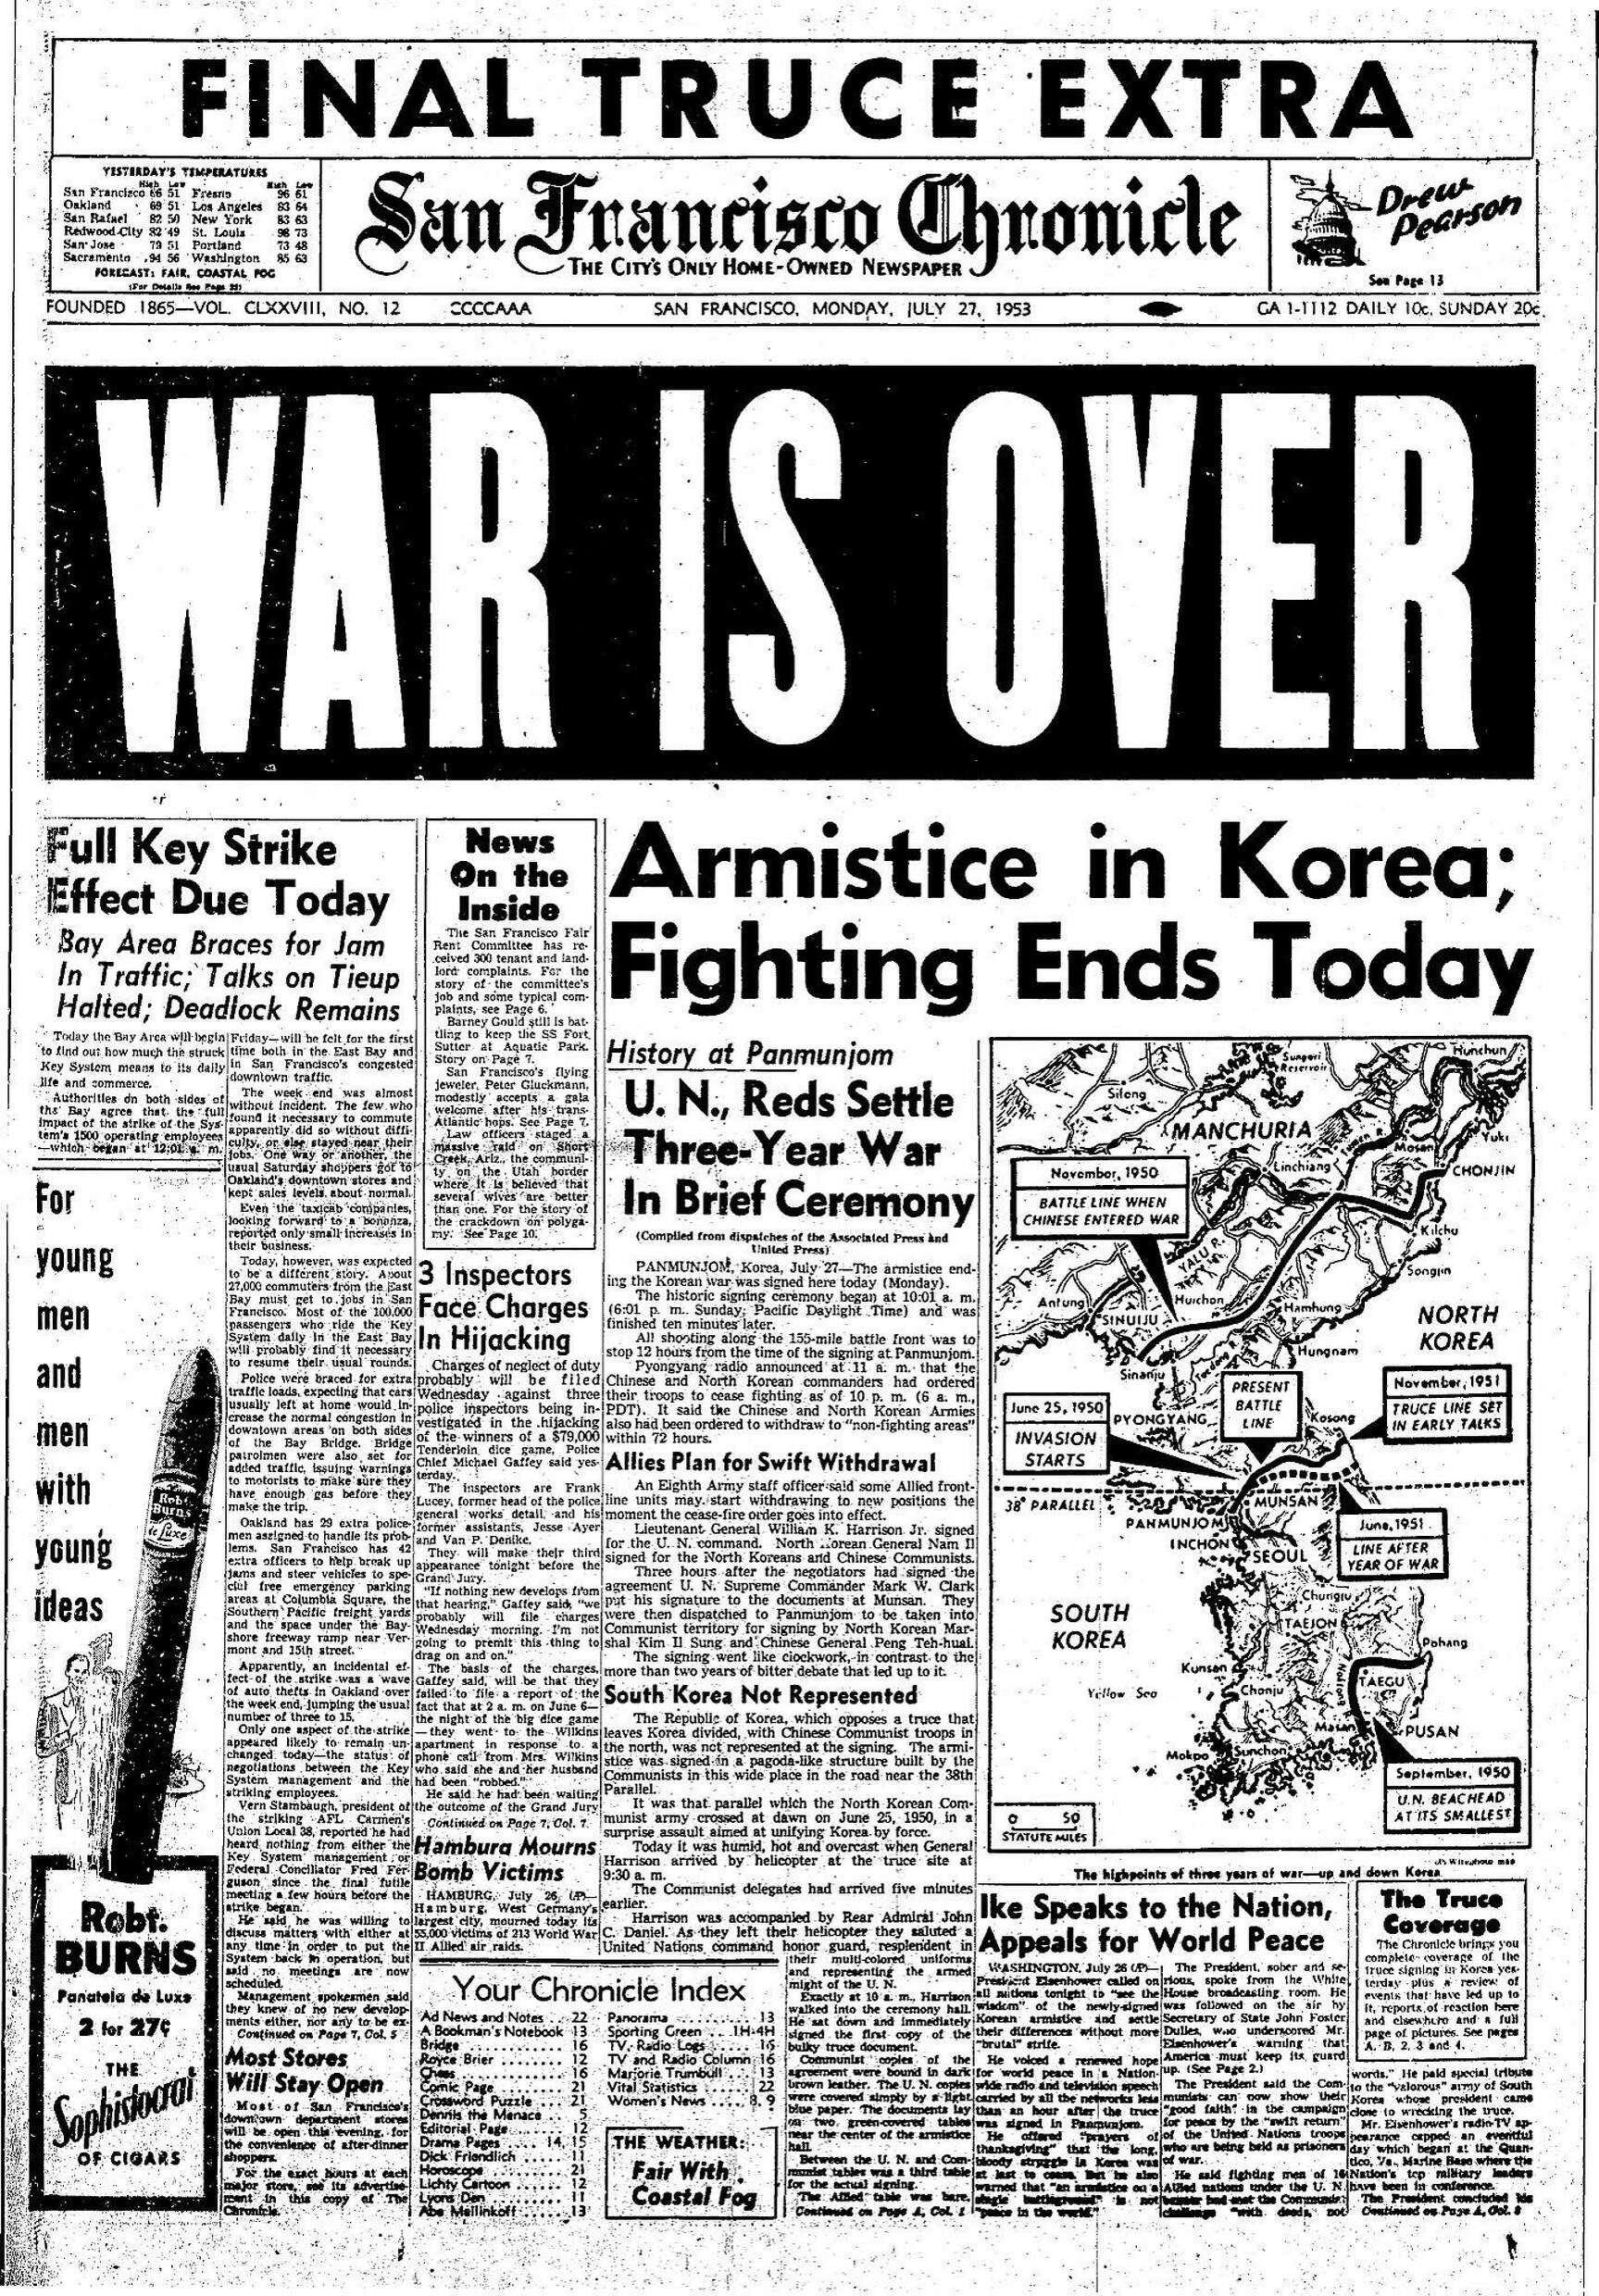 Chronicle Covers: The disputed end to the Korean War - SFChronicle.com1726 x 2480